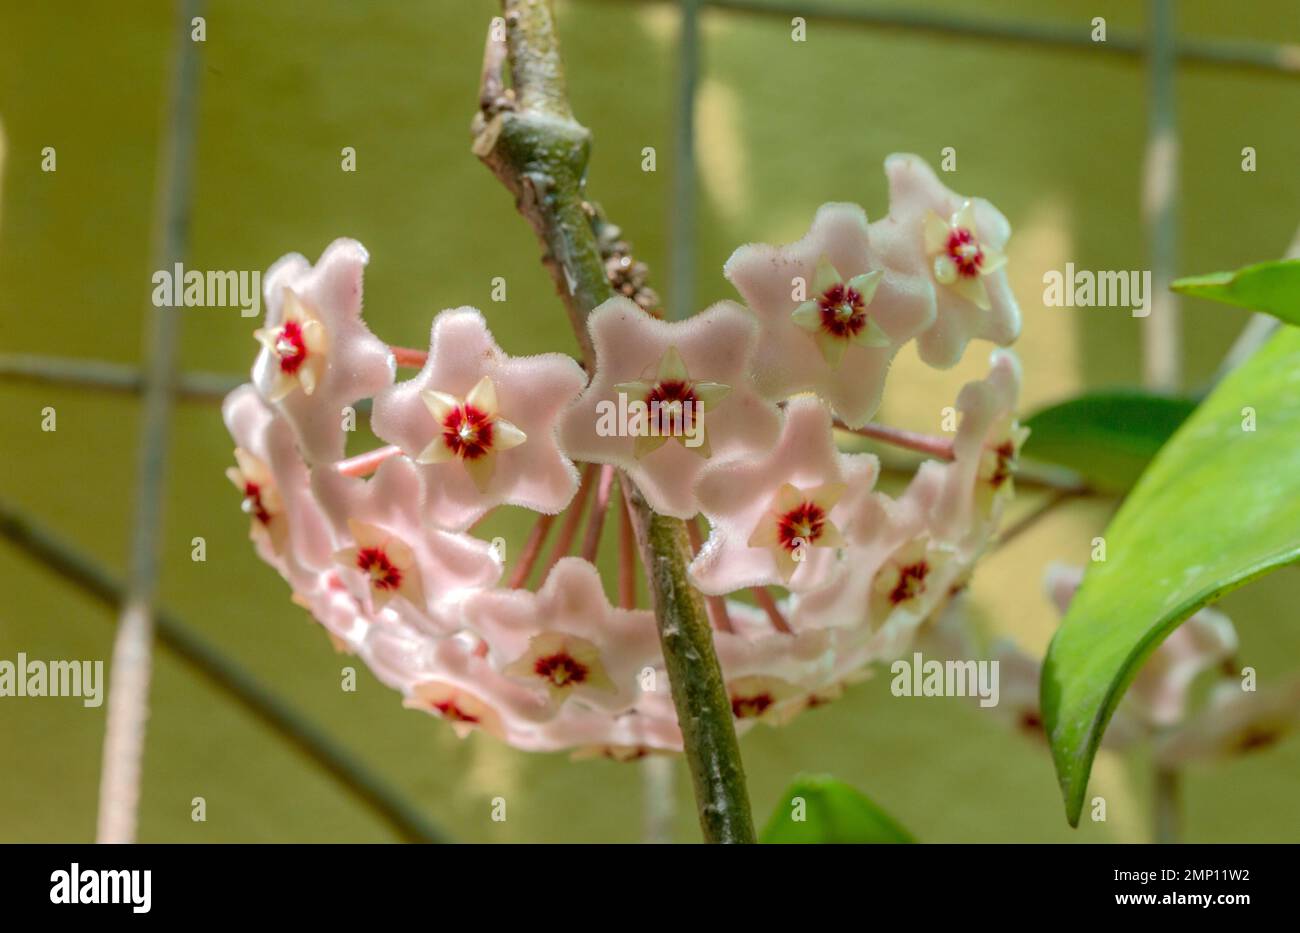 close-up photo of Hoya carnosa, the porcelain flower or wax plant, Stock Photo